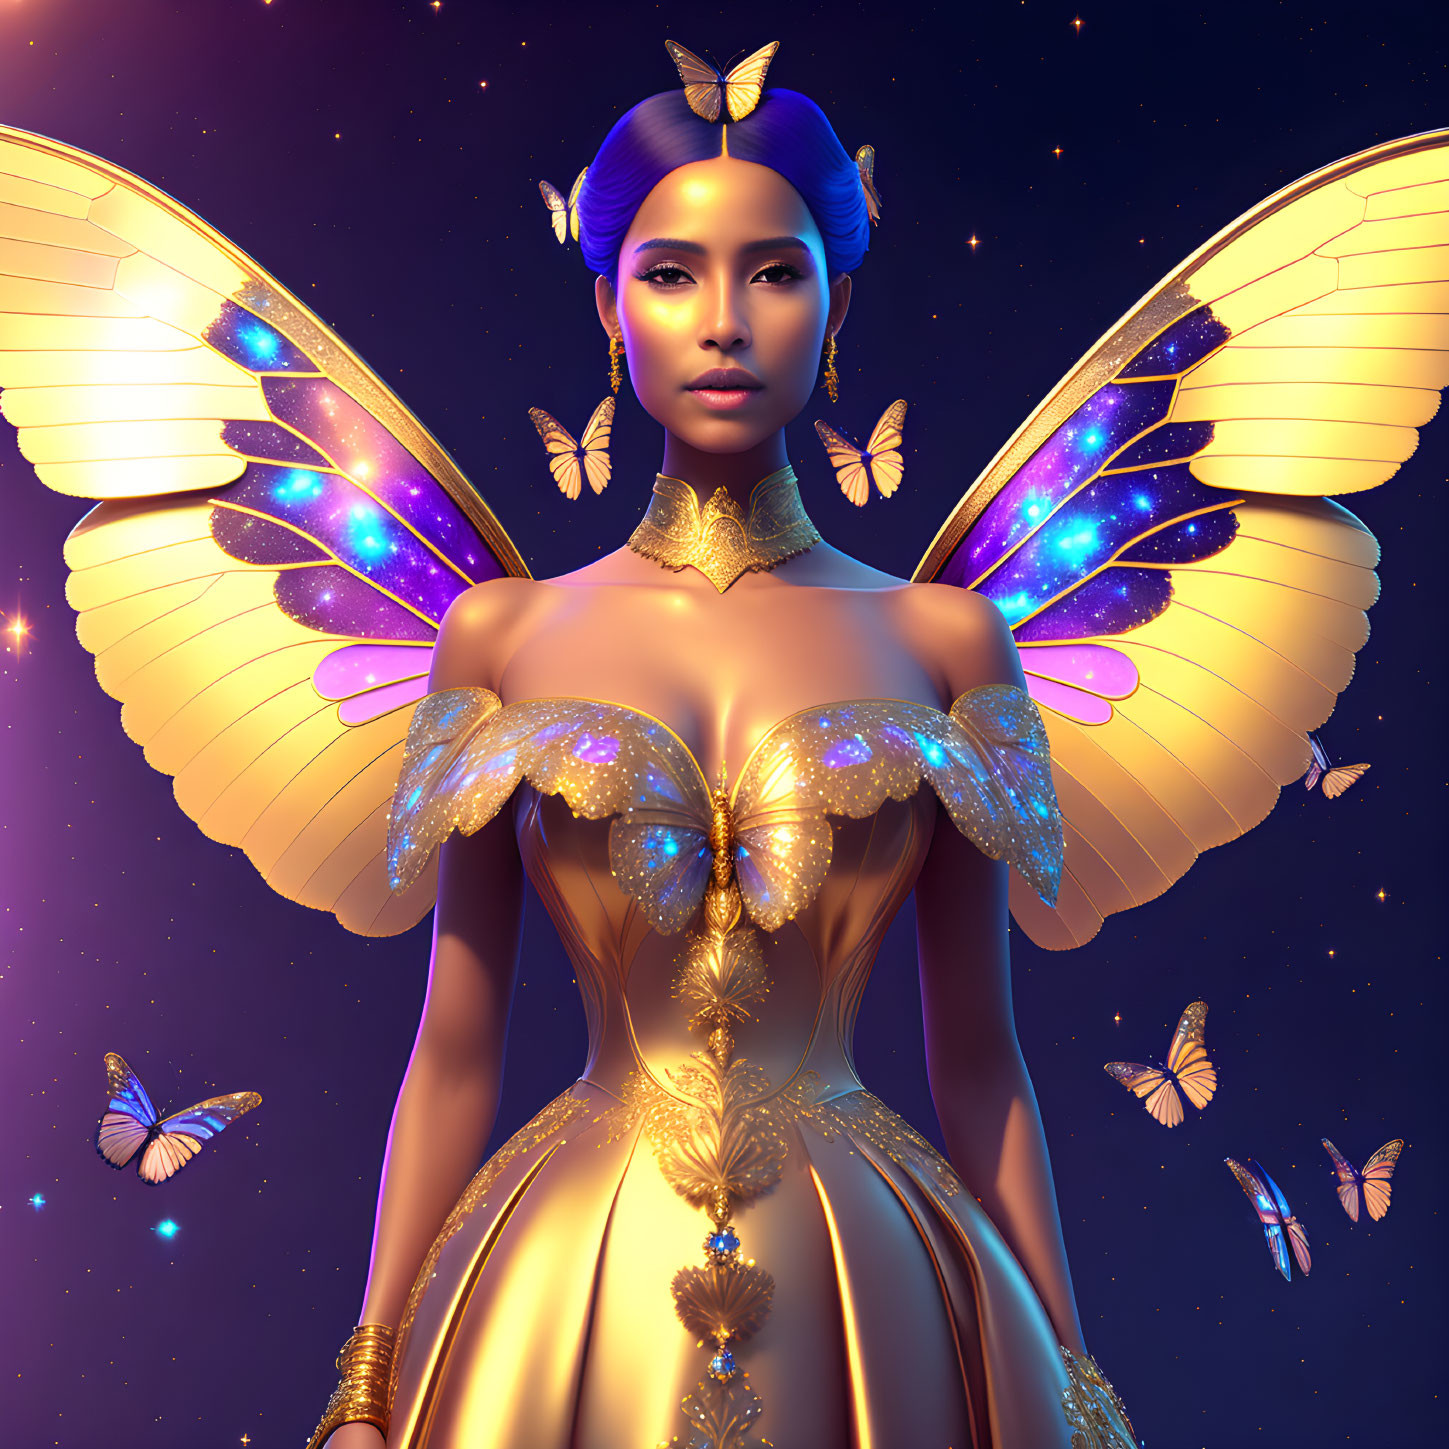 Digital artwork of woman with golden butterfly wings in starry background with glowing butterflies